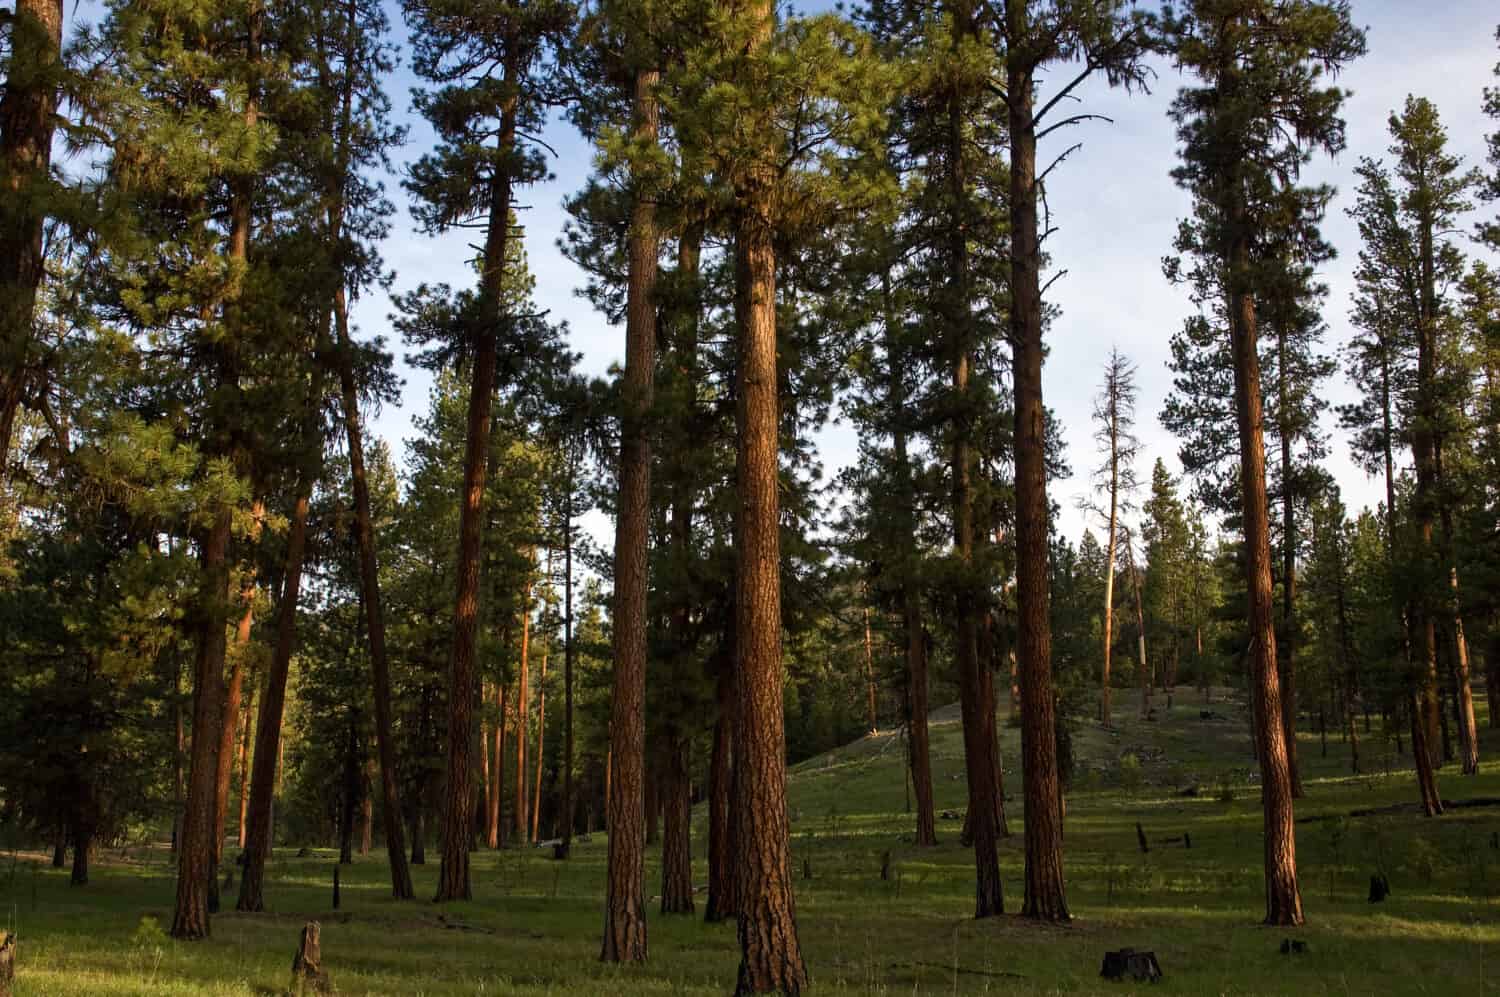 Tall, stately Ponderosa Pine trees showing the red rough bark they are known for in an open forest setting